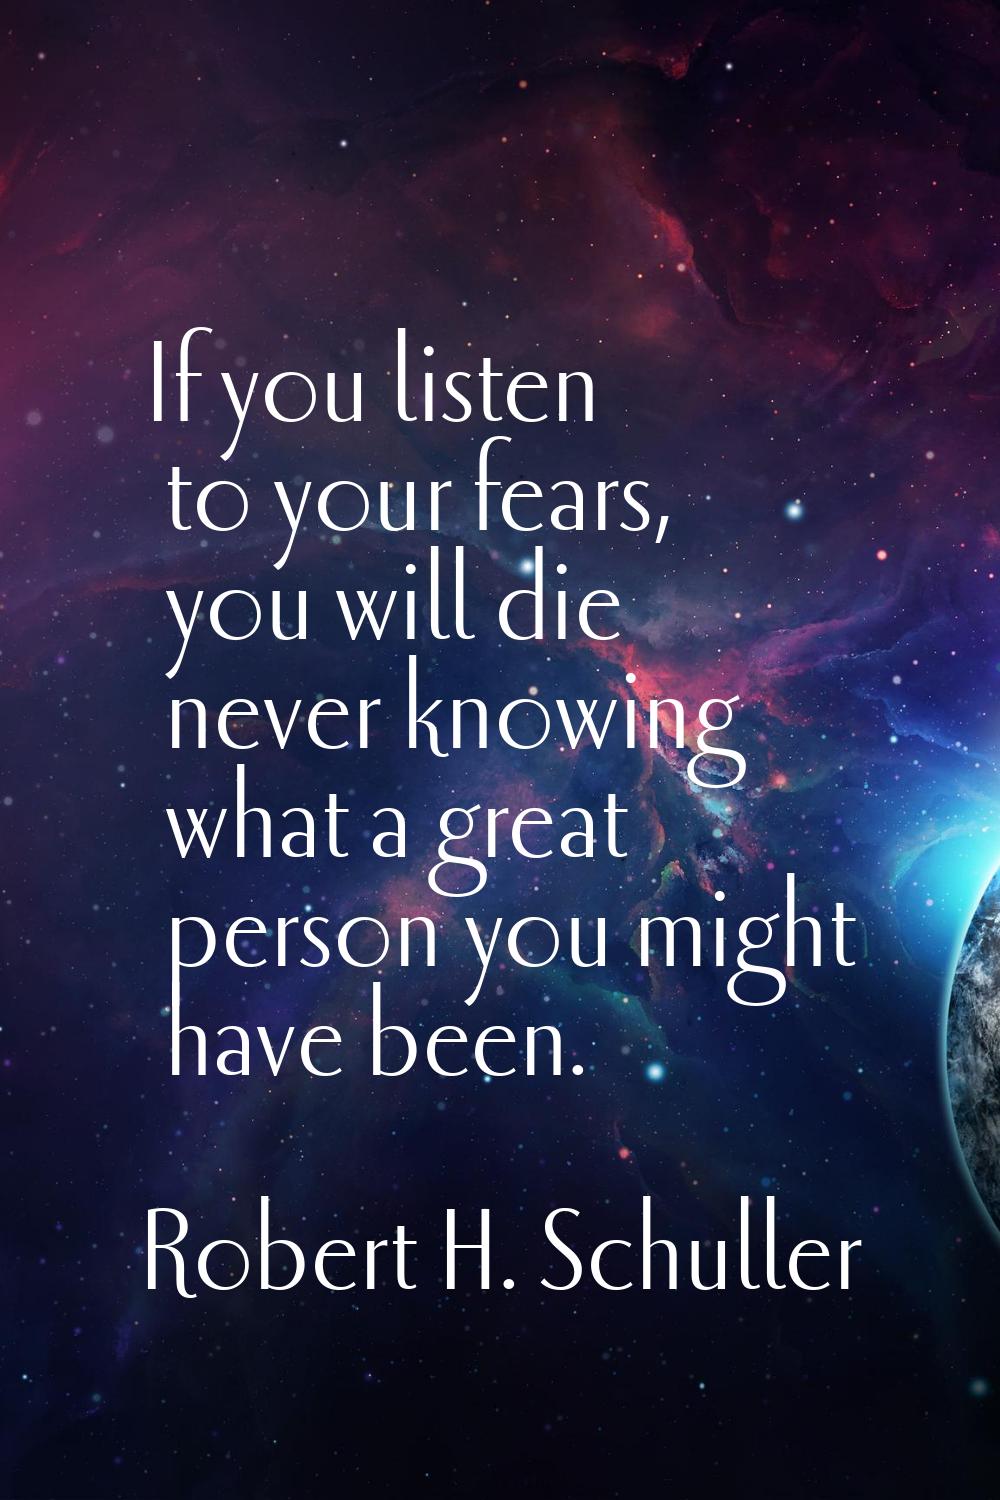 If you listen to your fears, you will die never knowing what a great person you might have been.